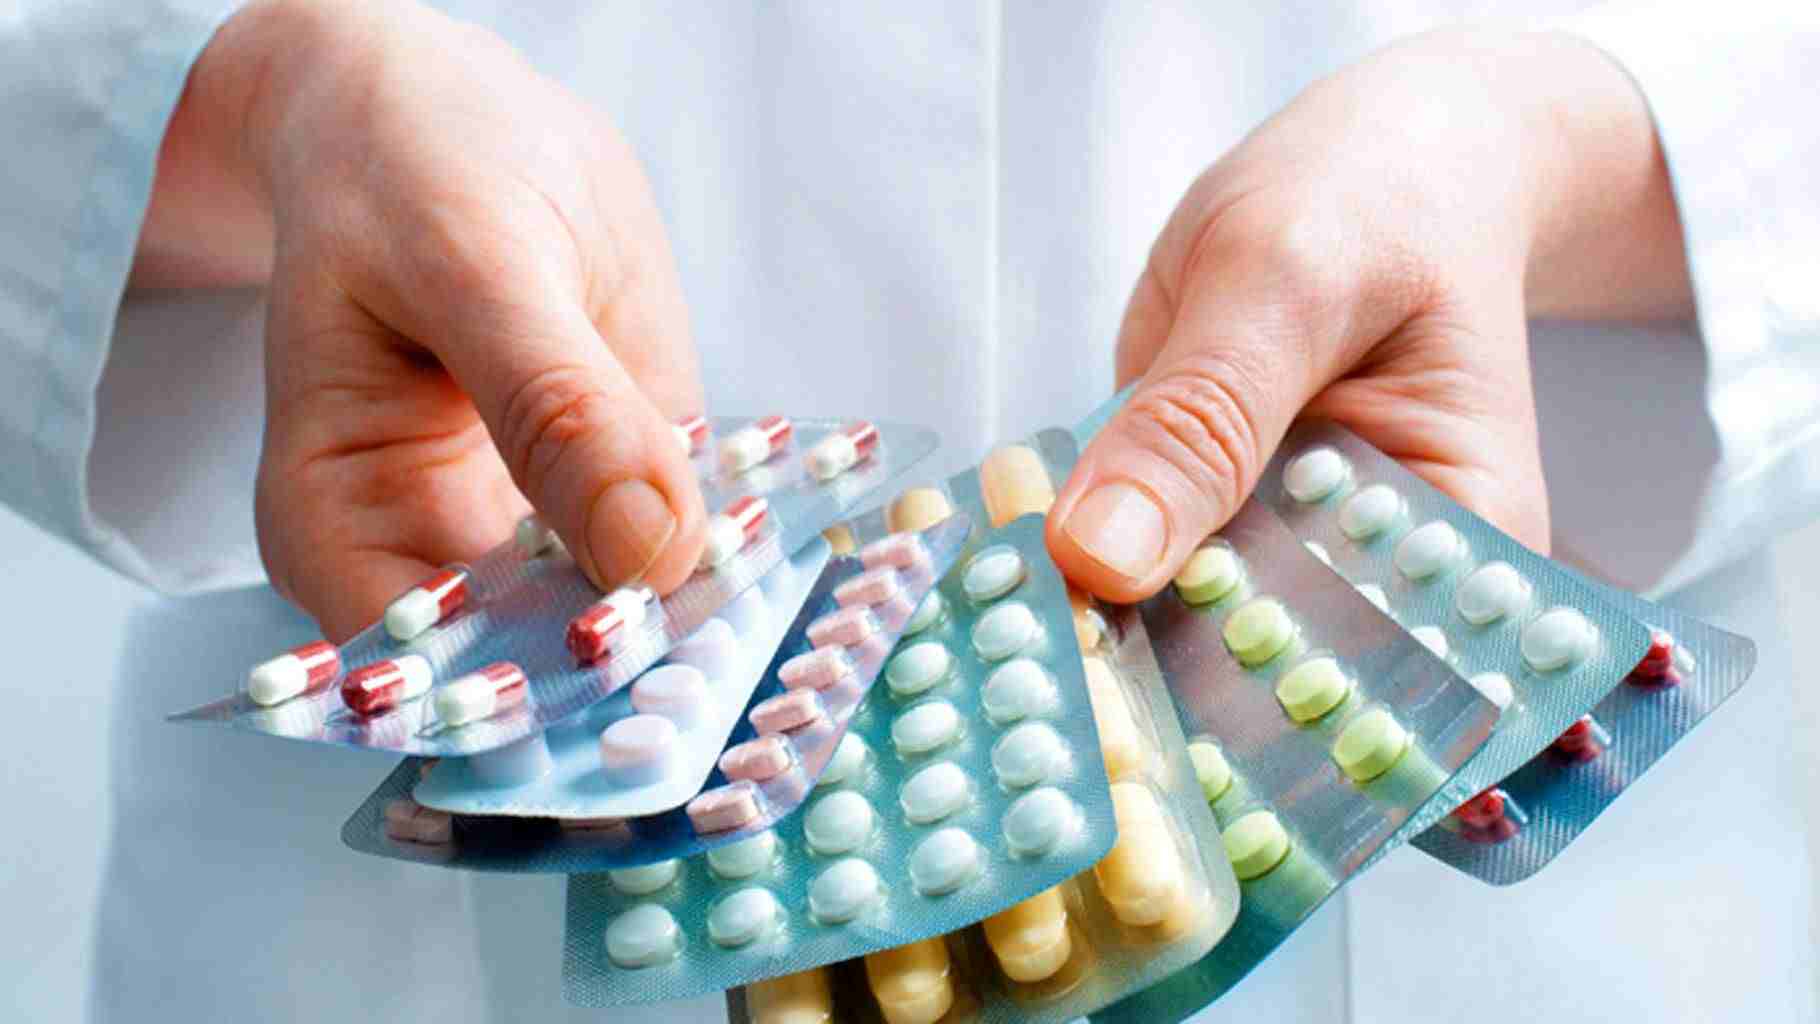 If doctors do not prescribe generic medicines, they will be punished, license may also be suspended